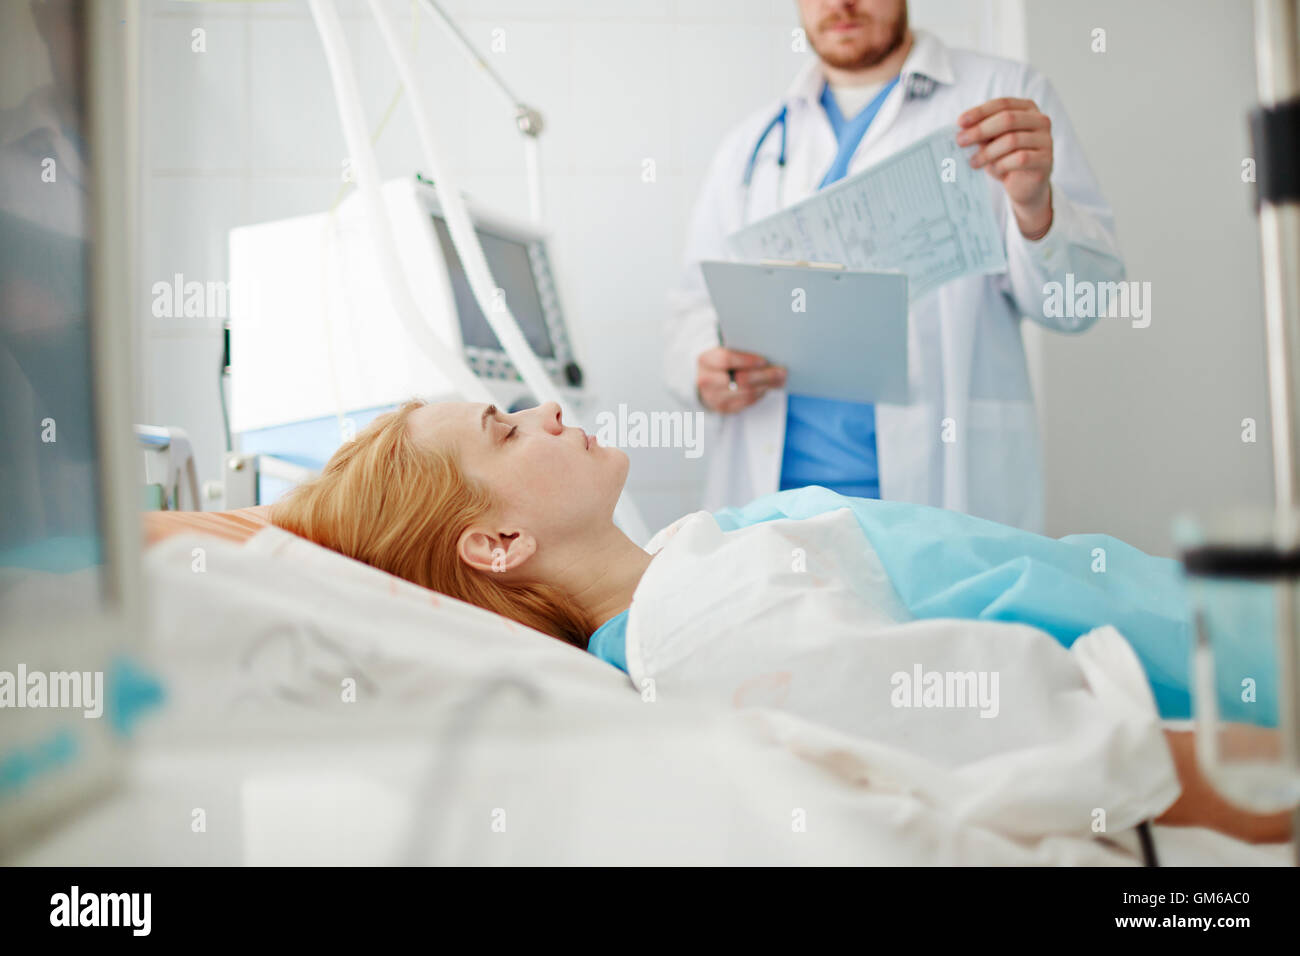 Patient at hospital Stock Photo